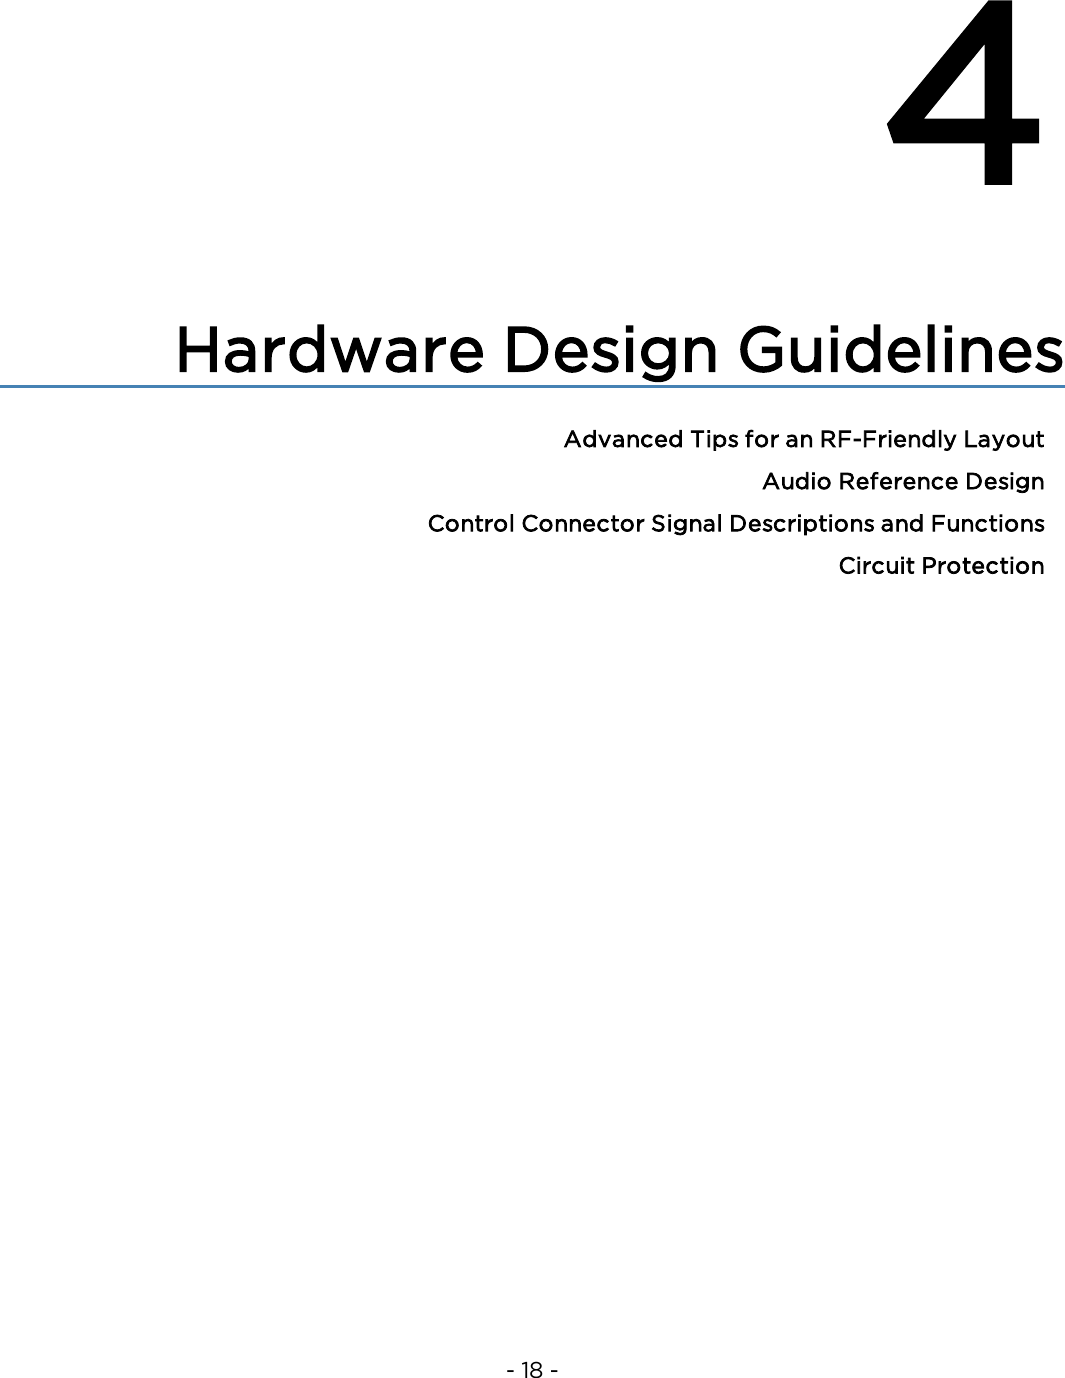 - 18 -4Hardware Design GuidelinesAdvanced Tips for an RF-Friendly LayoutAudio Reference DesignControl Connector Signal Descriptions and FunctionsCircuit Protection